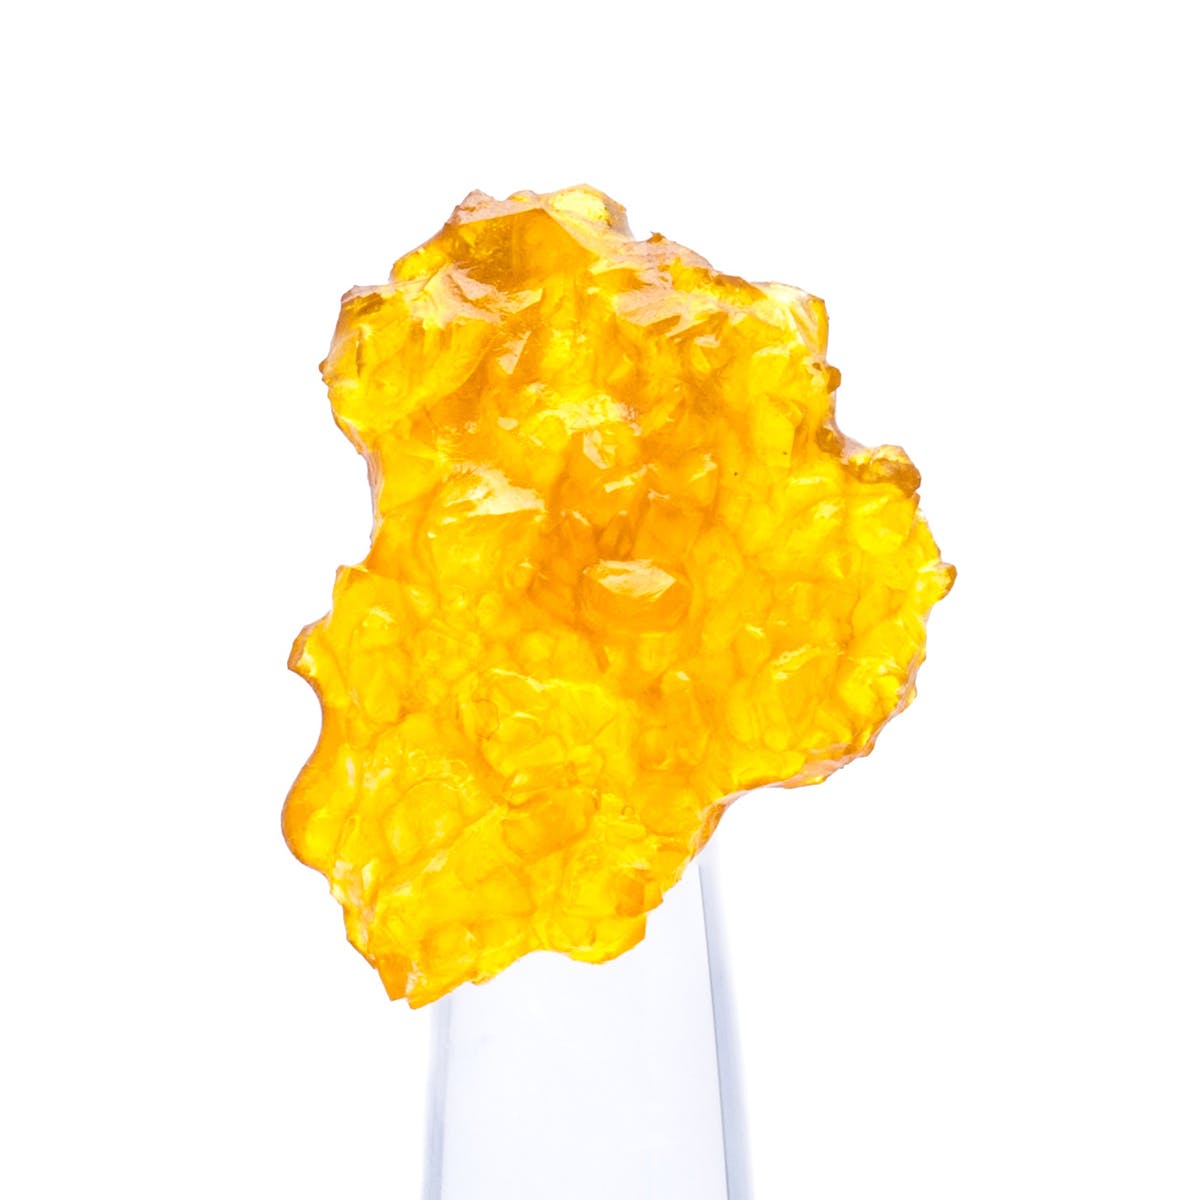 concentrate-buddies-brand-citrus-jilly-dream-live-resin